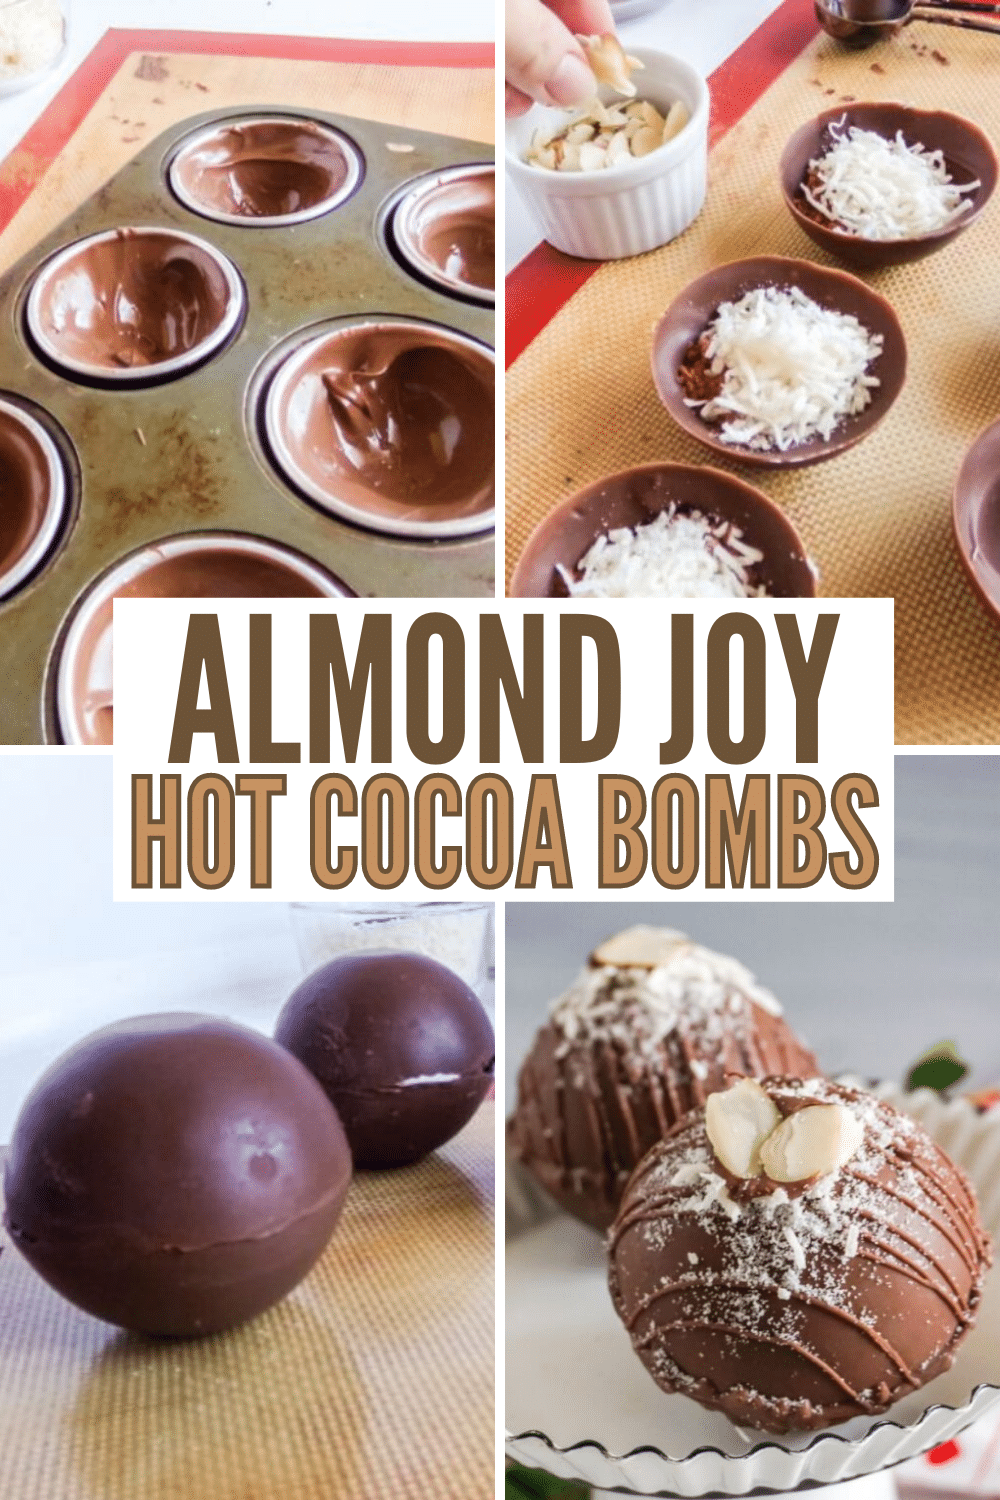 These Almond Joy Hot Cocoa Bombs will make you leave those candy bars at the store and make this instead. Taste just the same! #almondjoy #hotcocoabombs #hotcocoa #recipe via @wondermomwannab